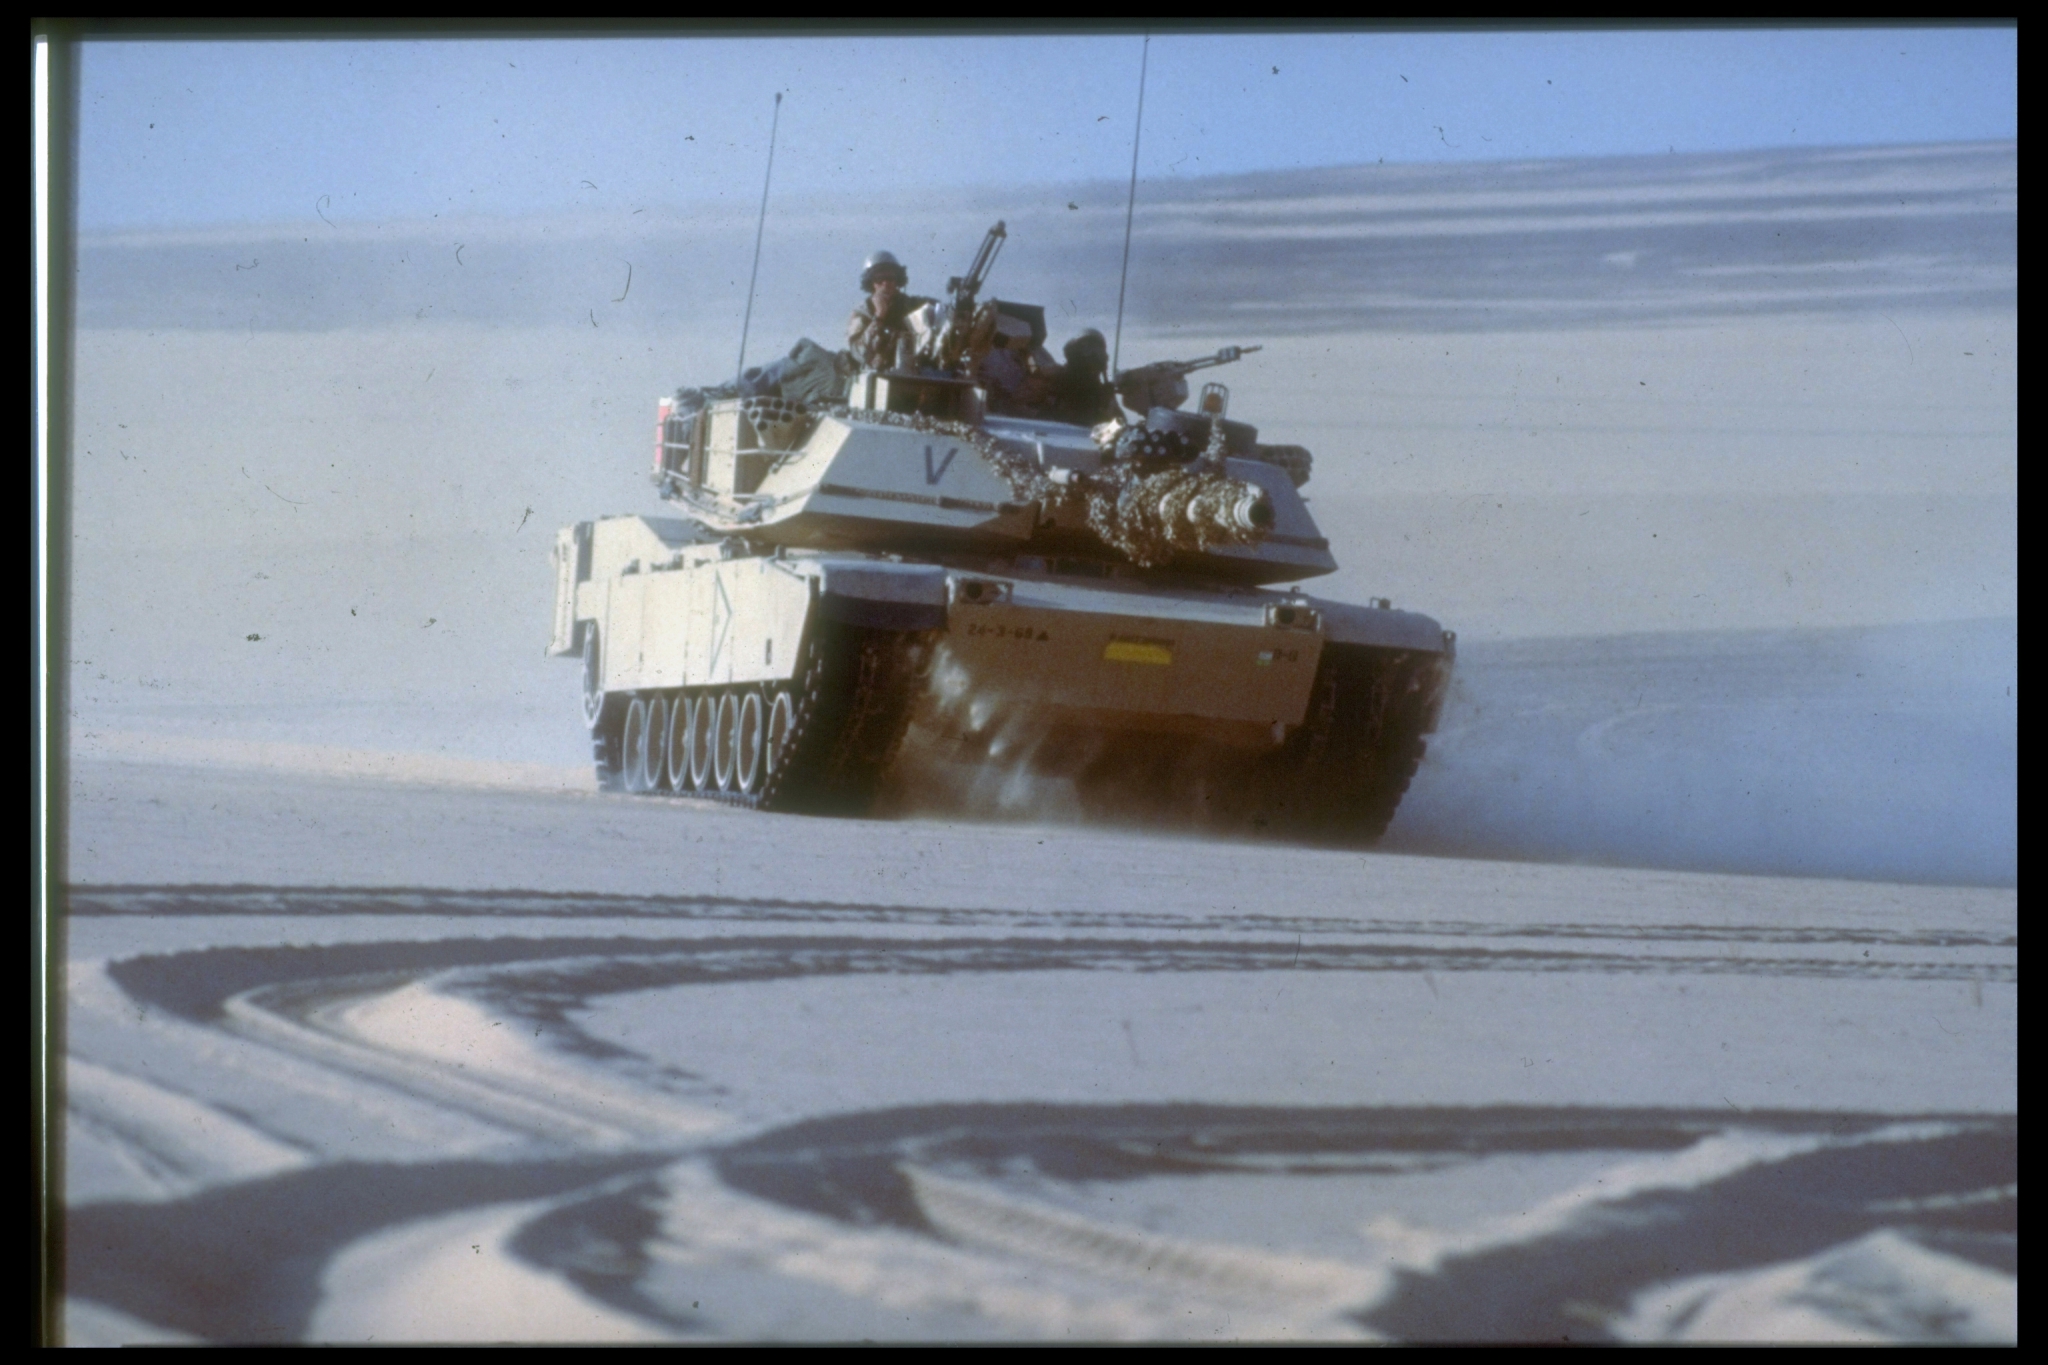 M1 Abrams Years active: 1980 - 1985